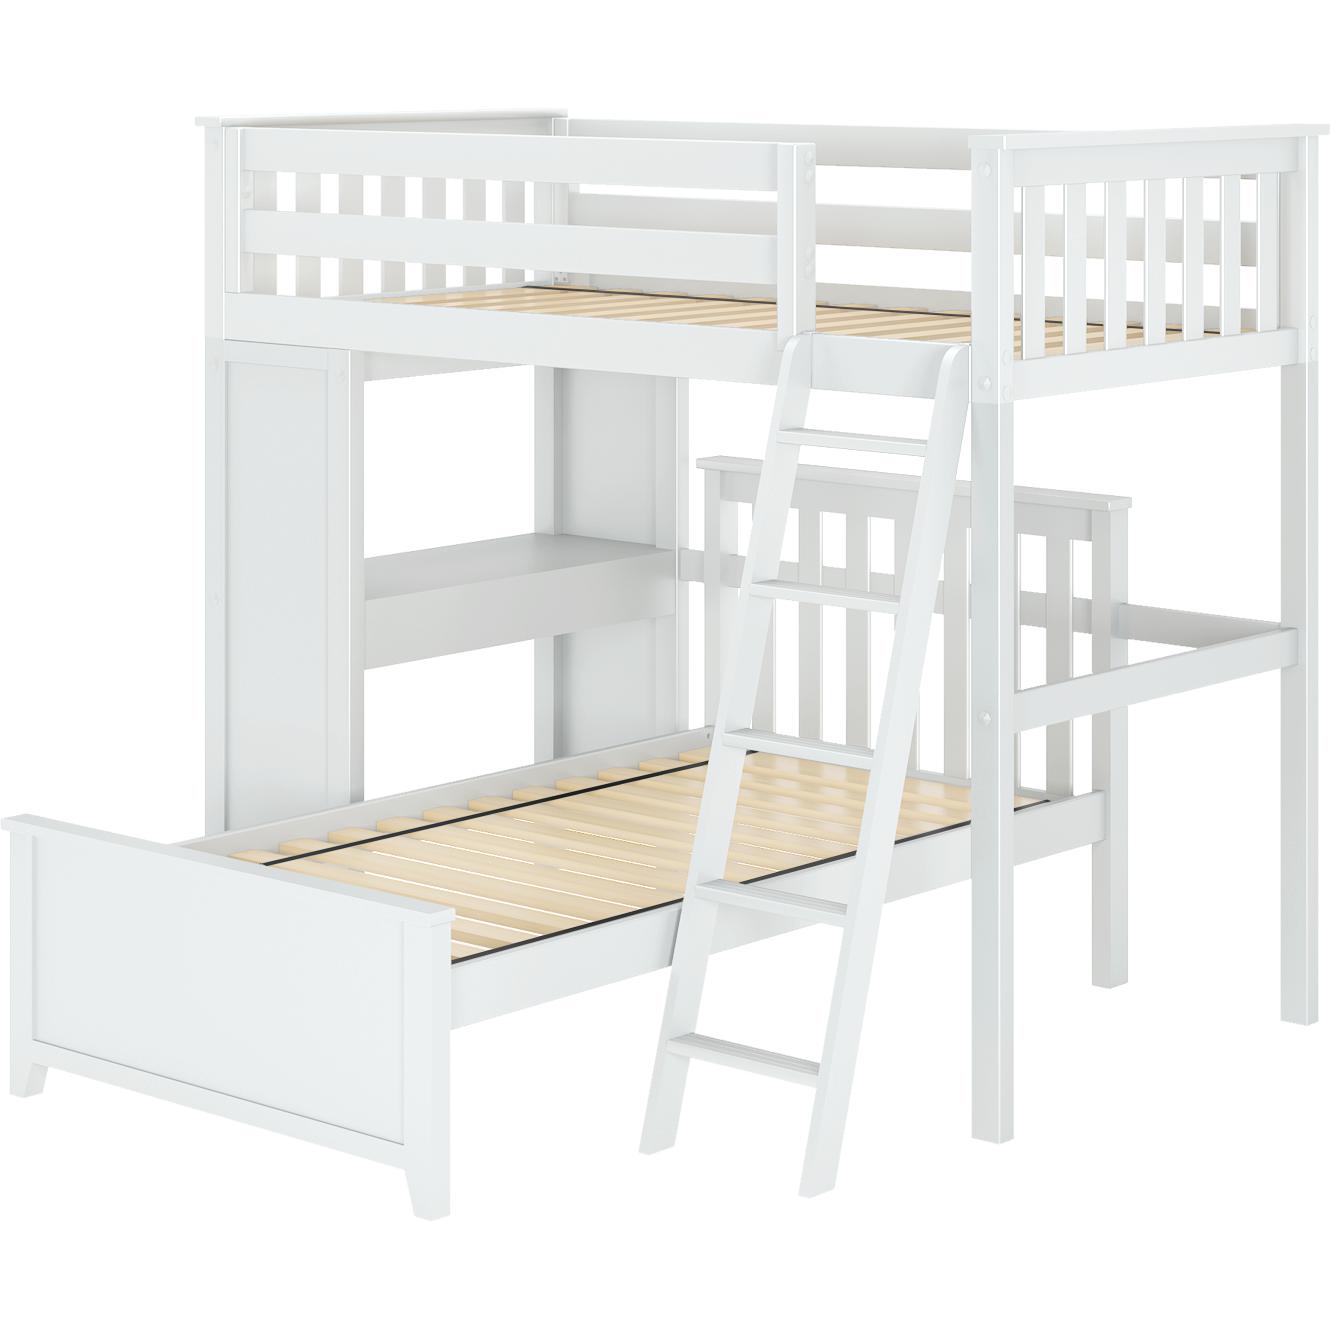 Jackpot Deluxe "CANTEBURY 1" Twin Loft Bed Study + Twin Bed